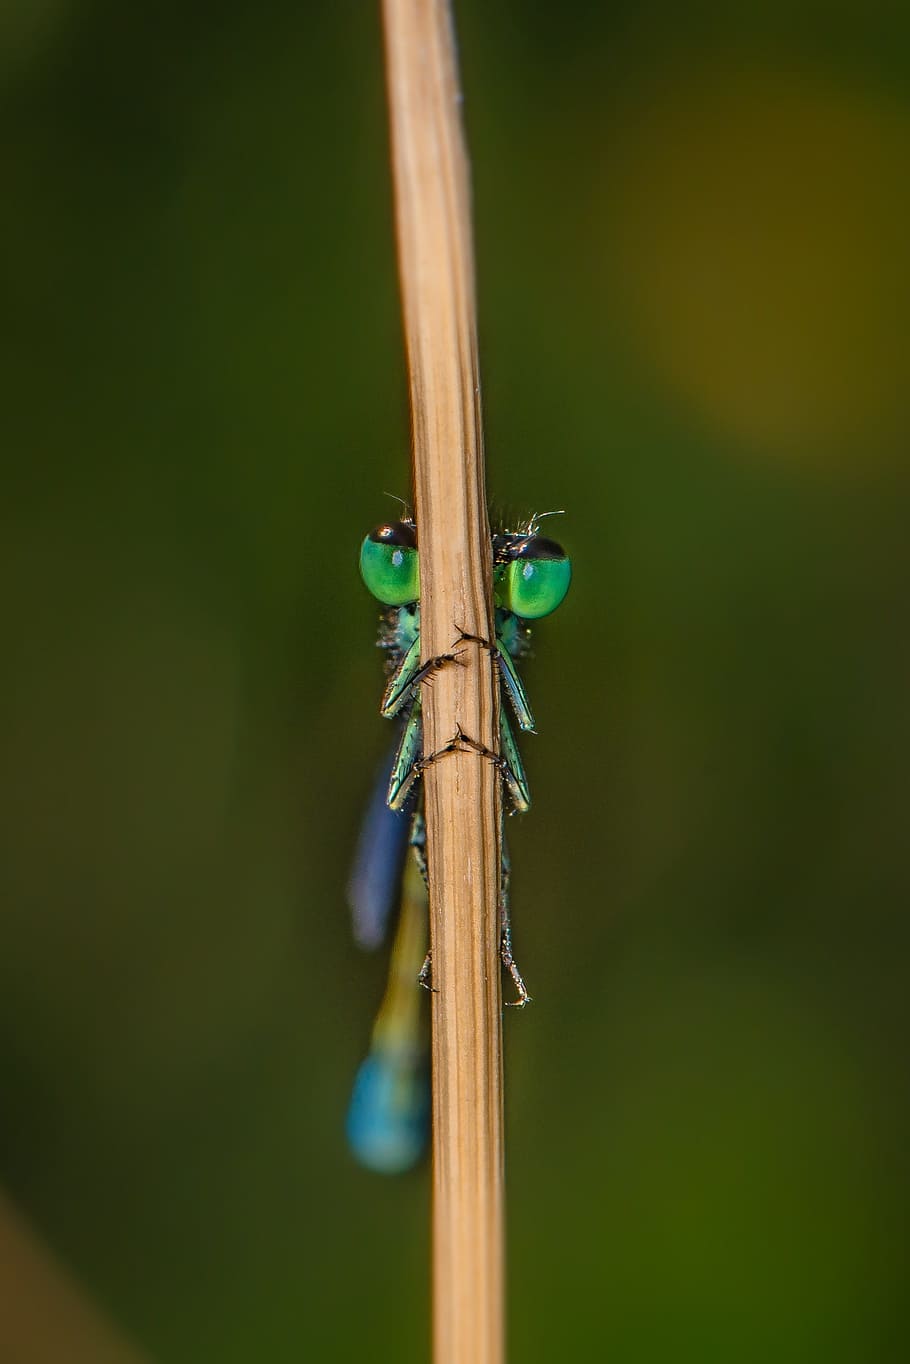 dragonfly, close, insect, nature, macro, compound eyes, wood - material, close-up, animals in the wild, green color